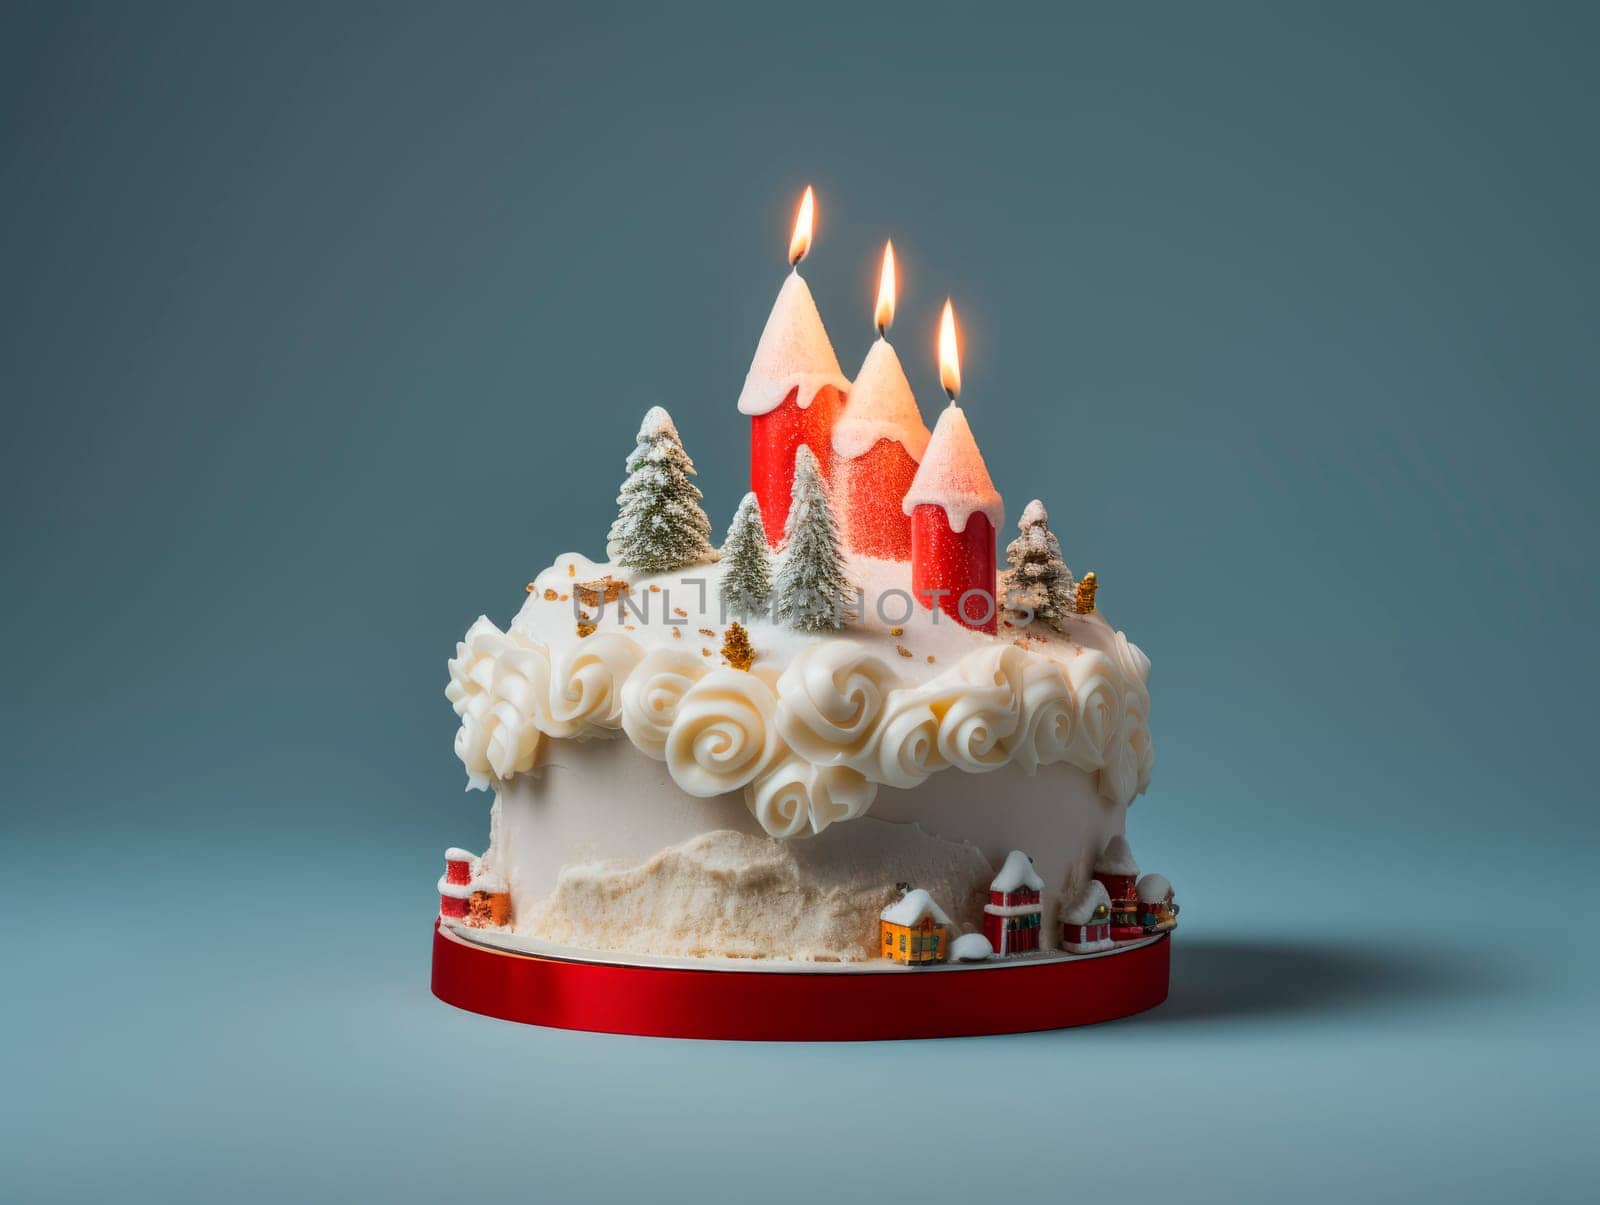 Beautiful Christmas cake decorated with candles. Christmas dessert.